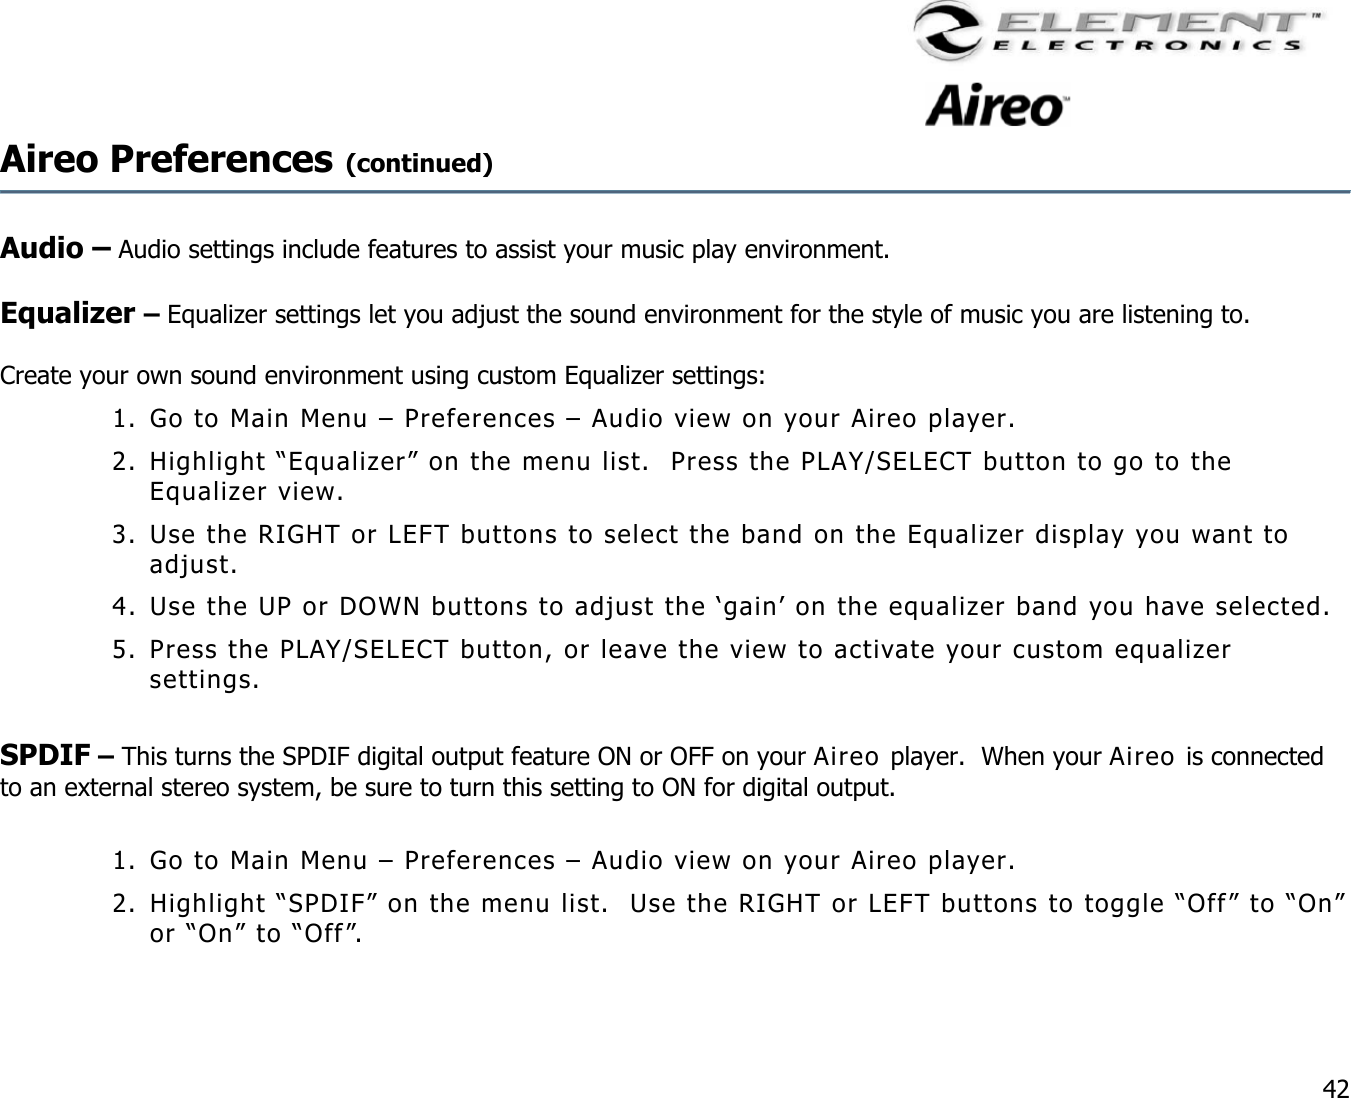                                                                                    42 Aireo Preferences (continued)     Audio – Audio settings include features to assist your music play environment.      Equalizer – Equalizer settings let you adjust the sound environment for the style of music you are listening to.     Create your own sound environment using custom Equalizer settings: 1. Go to Main Menu – Preferences – Audio view on your Aireo player. 2. Highlight “Equalizer” on the menu list.  Press the PLAY/SELECT button to go to the Equalizer view.  3. Use the RIGHT or LEFT buttons to select the band on the Equalizer display you want to adjust.   4. Use the UP or DOWN buttons to adjust the ‘gain’ on the equalizer band you have selected.  5. Press the PLAY/SELECT button, or leave the view to activate your custom equalizer settings.  SPDIF – This turns the SPDIF digital output feature ON or OFF on your Aireo player.  When your Aireo is connected to an external stereo system, be sure to turn this setting to ON for digital output.   1. Go to Main Menu – Preferences – Audio view on your Aireo player. 2. Highlight “SPDIF” on the menu list.  Use the RIGHT or LEFT buttons to toggle “Off” to “On” or “On” to “Off”.   